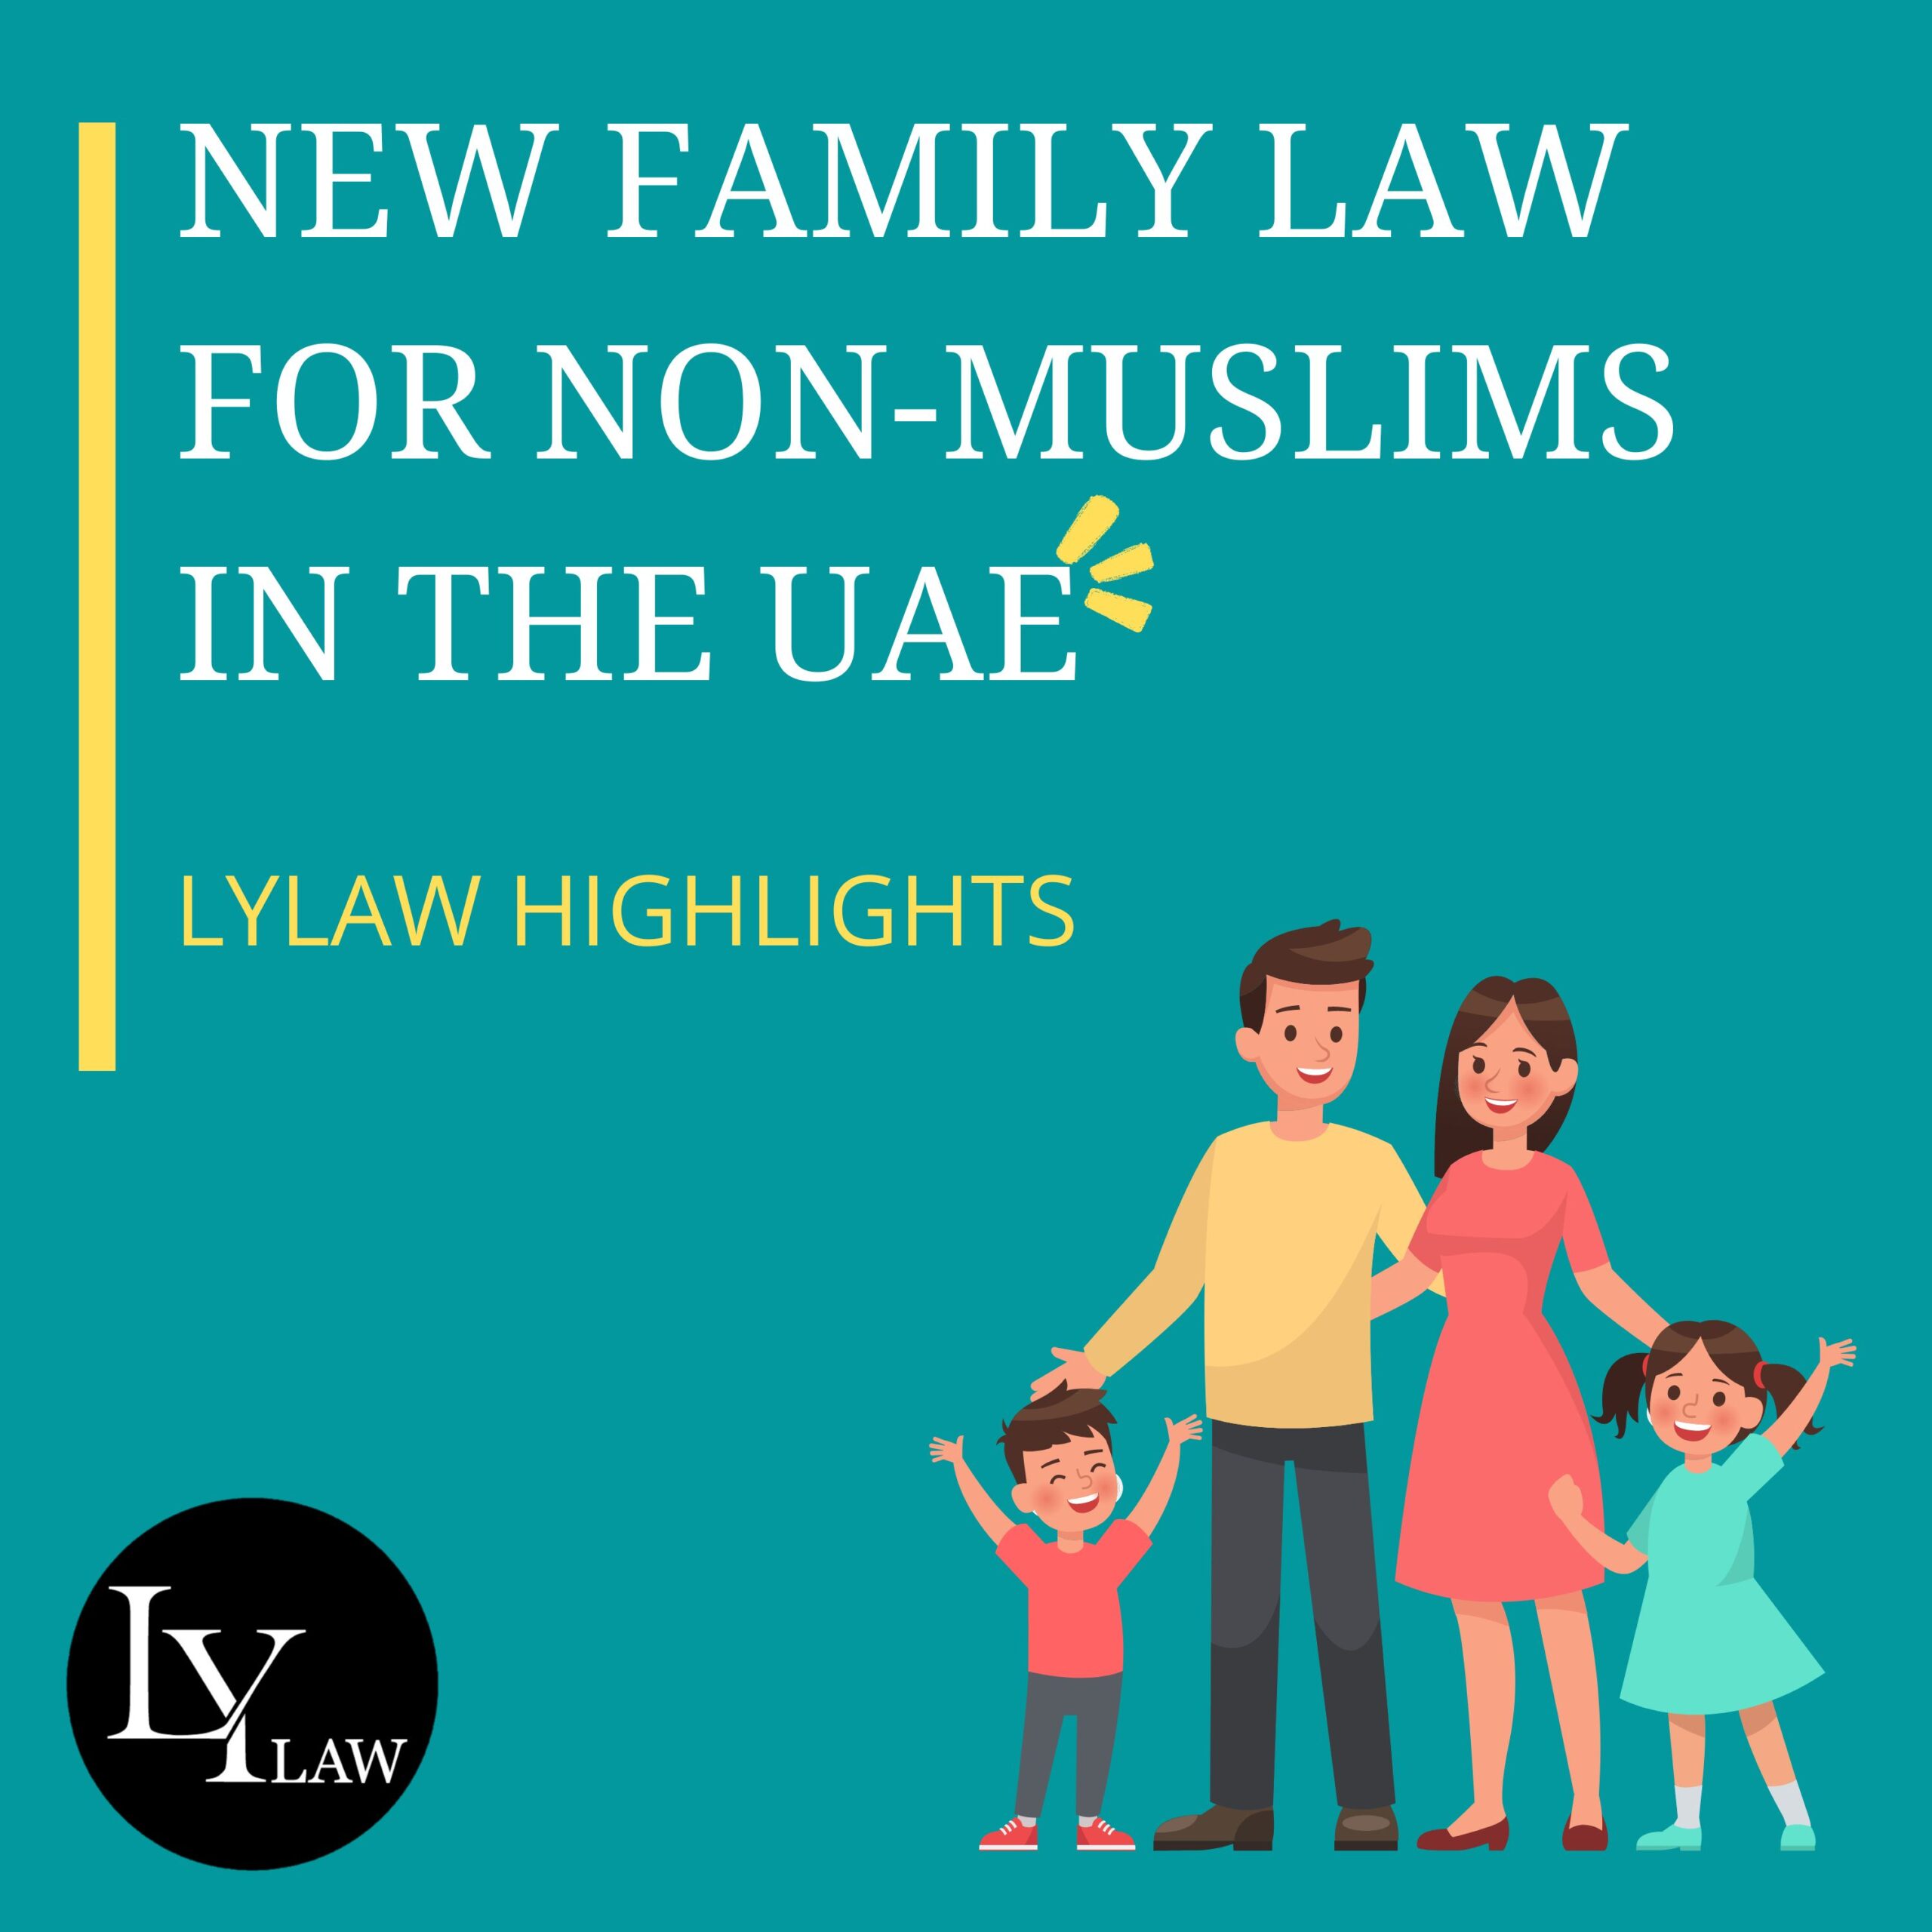 new family law for non-Muslims